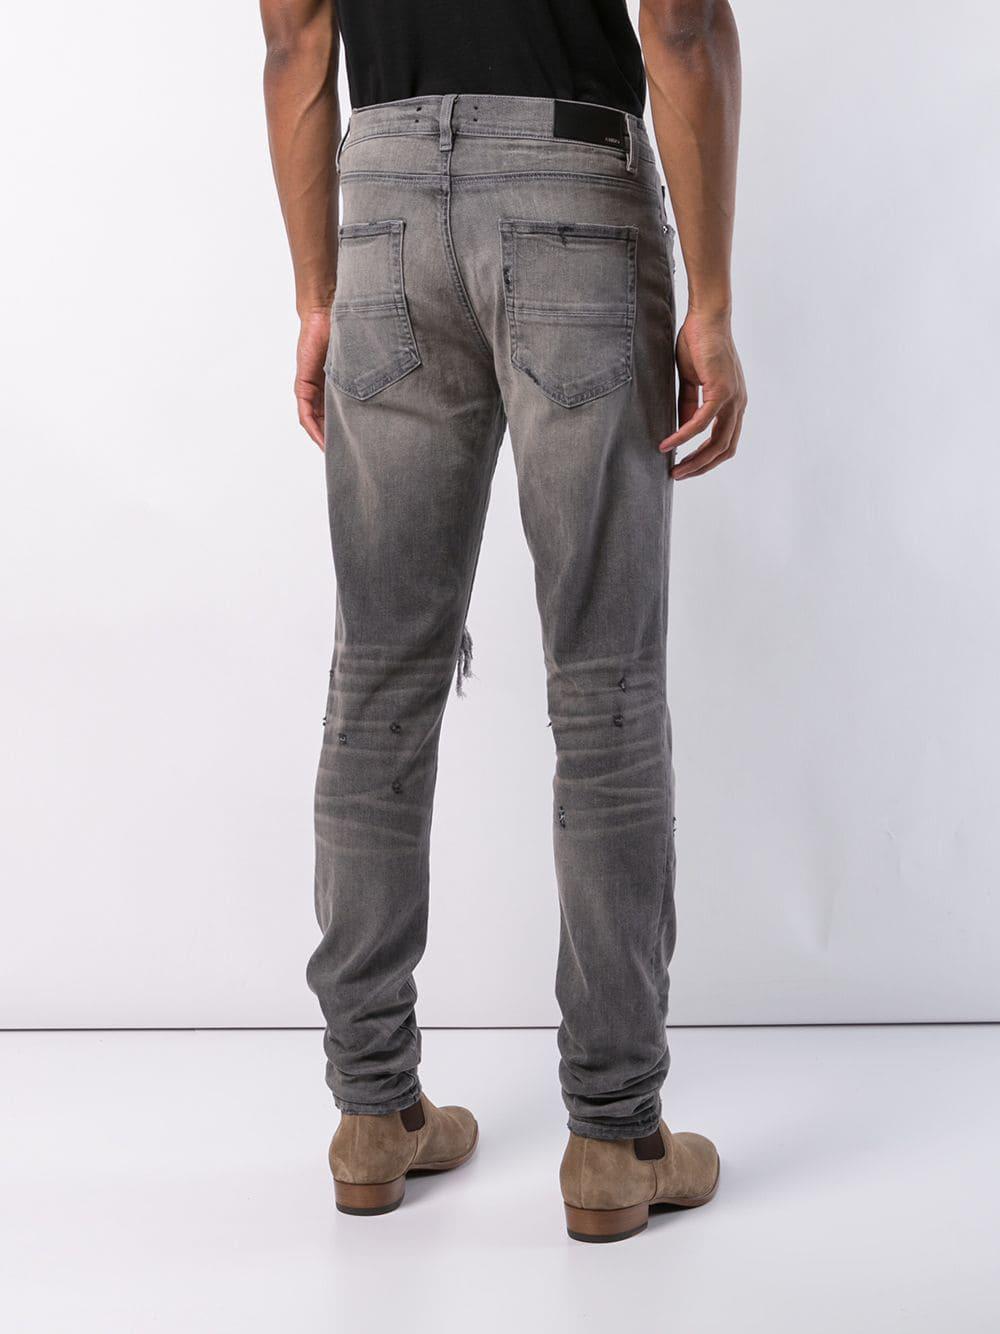 Amiri Synthetic Distressed Jeans in Grey (Gray) for Men - Lyst